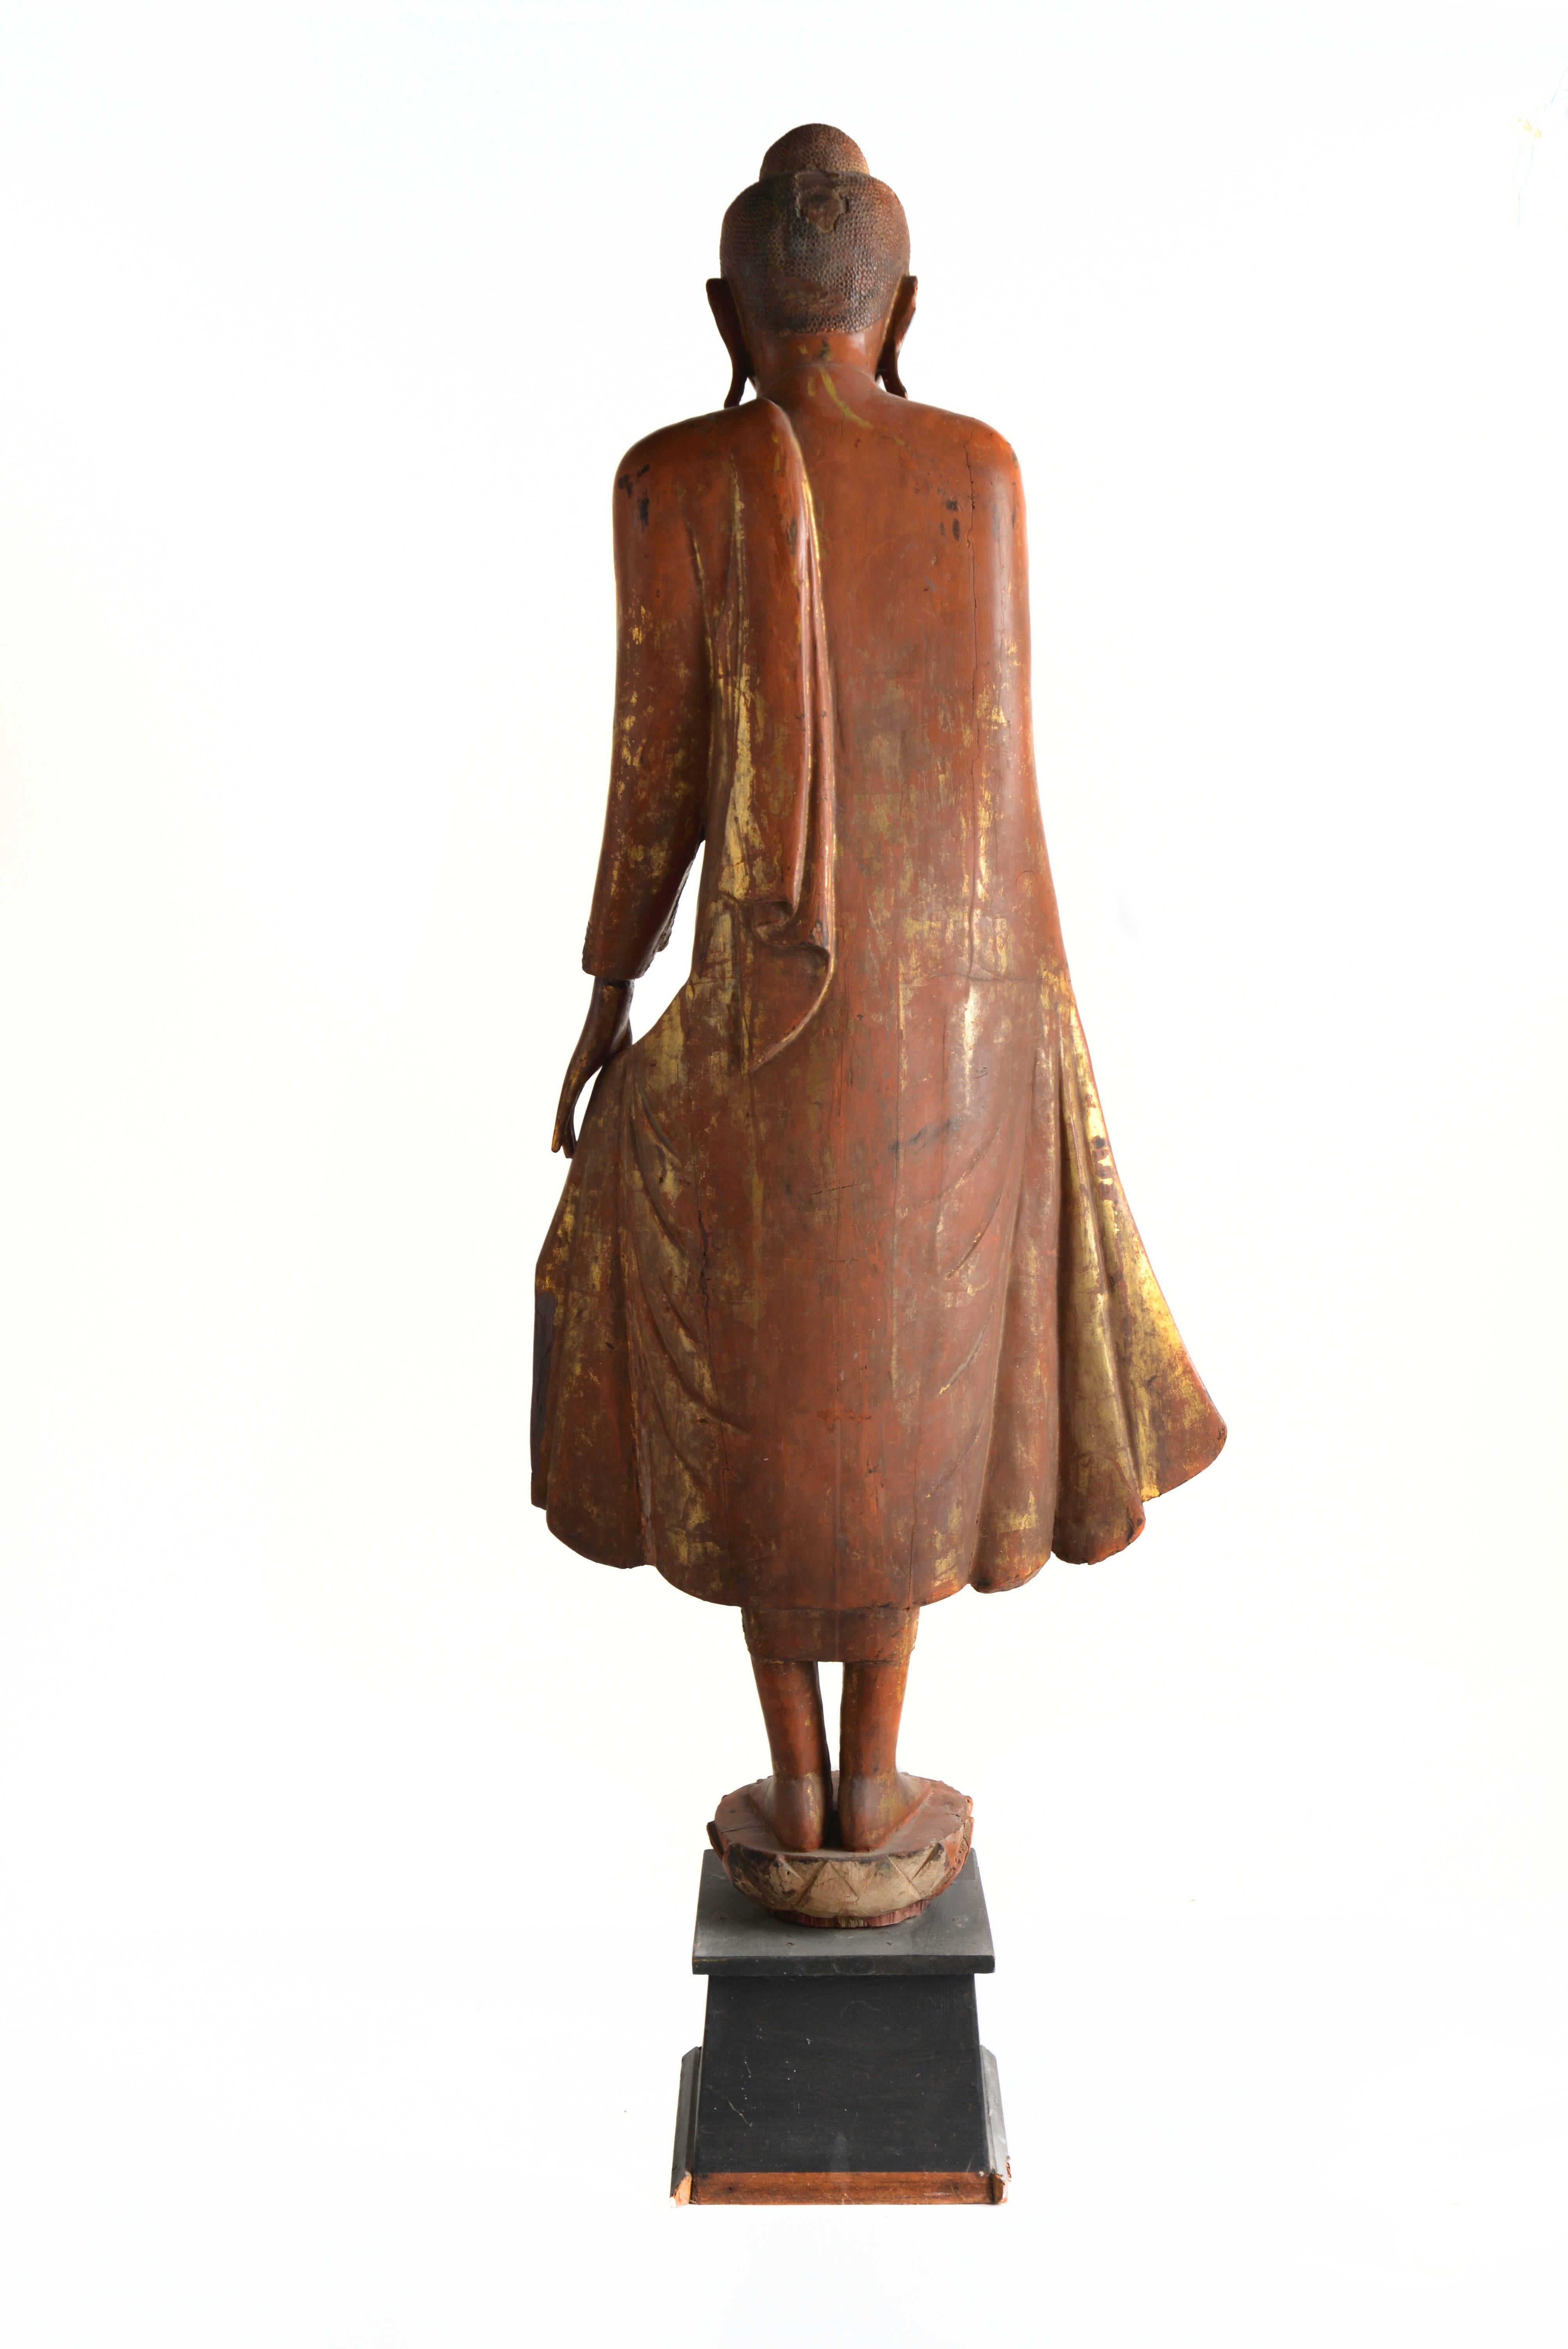 Gilt Large Standing Sculpture of Burmese Buddha, 19th Century For Sale